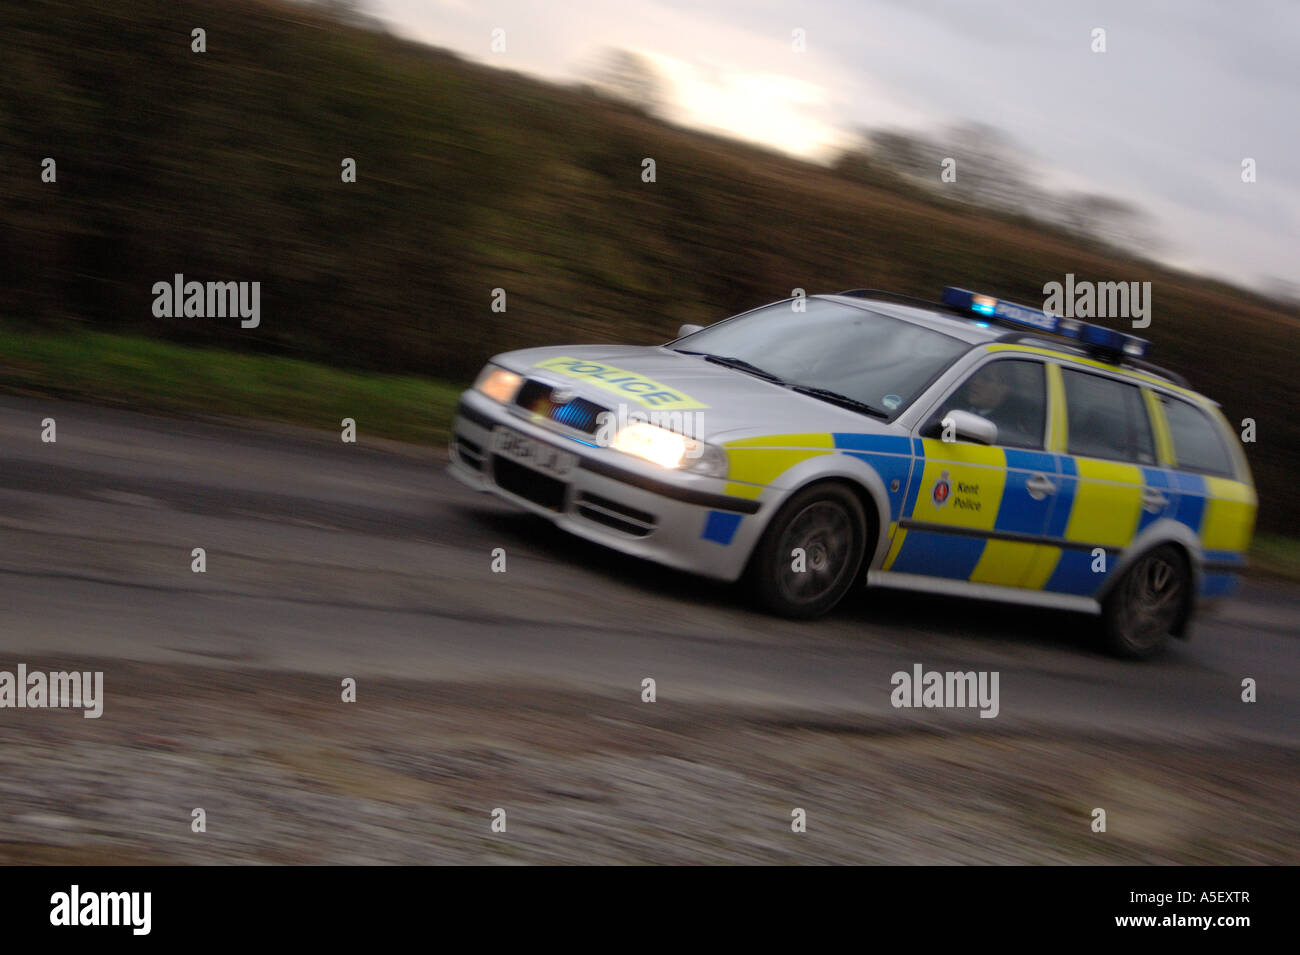 Police car races to emergency with lights flashing Stock Photo